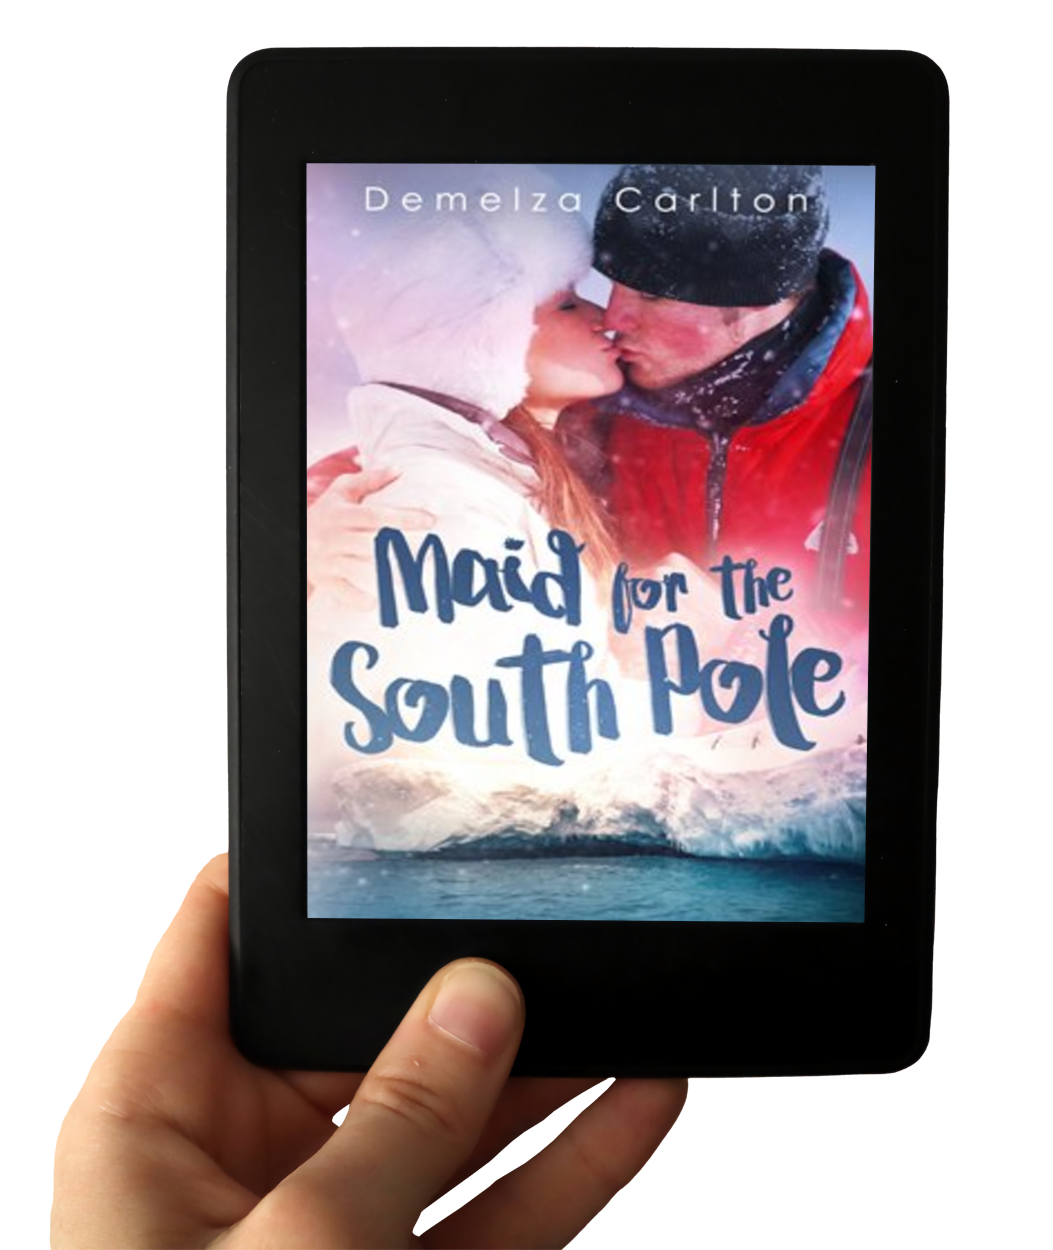 A steamy contemporary romantic comedy holiday romance for fans of Marie Force, Lauren Blakely, Kristen Ashley and Kylie Scott